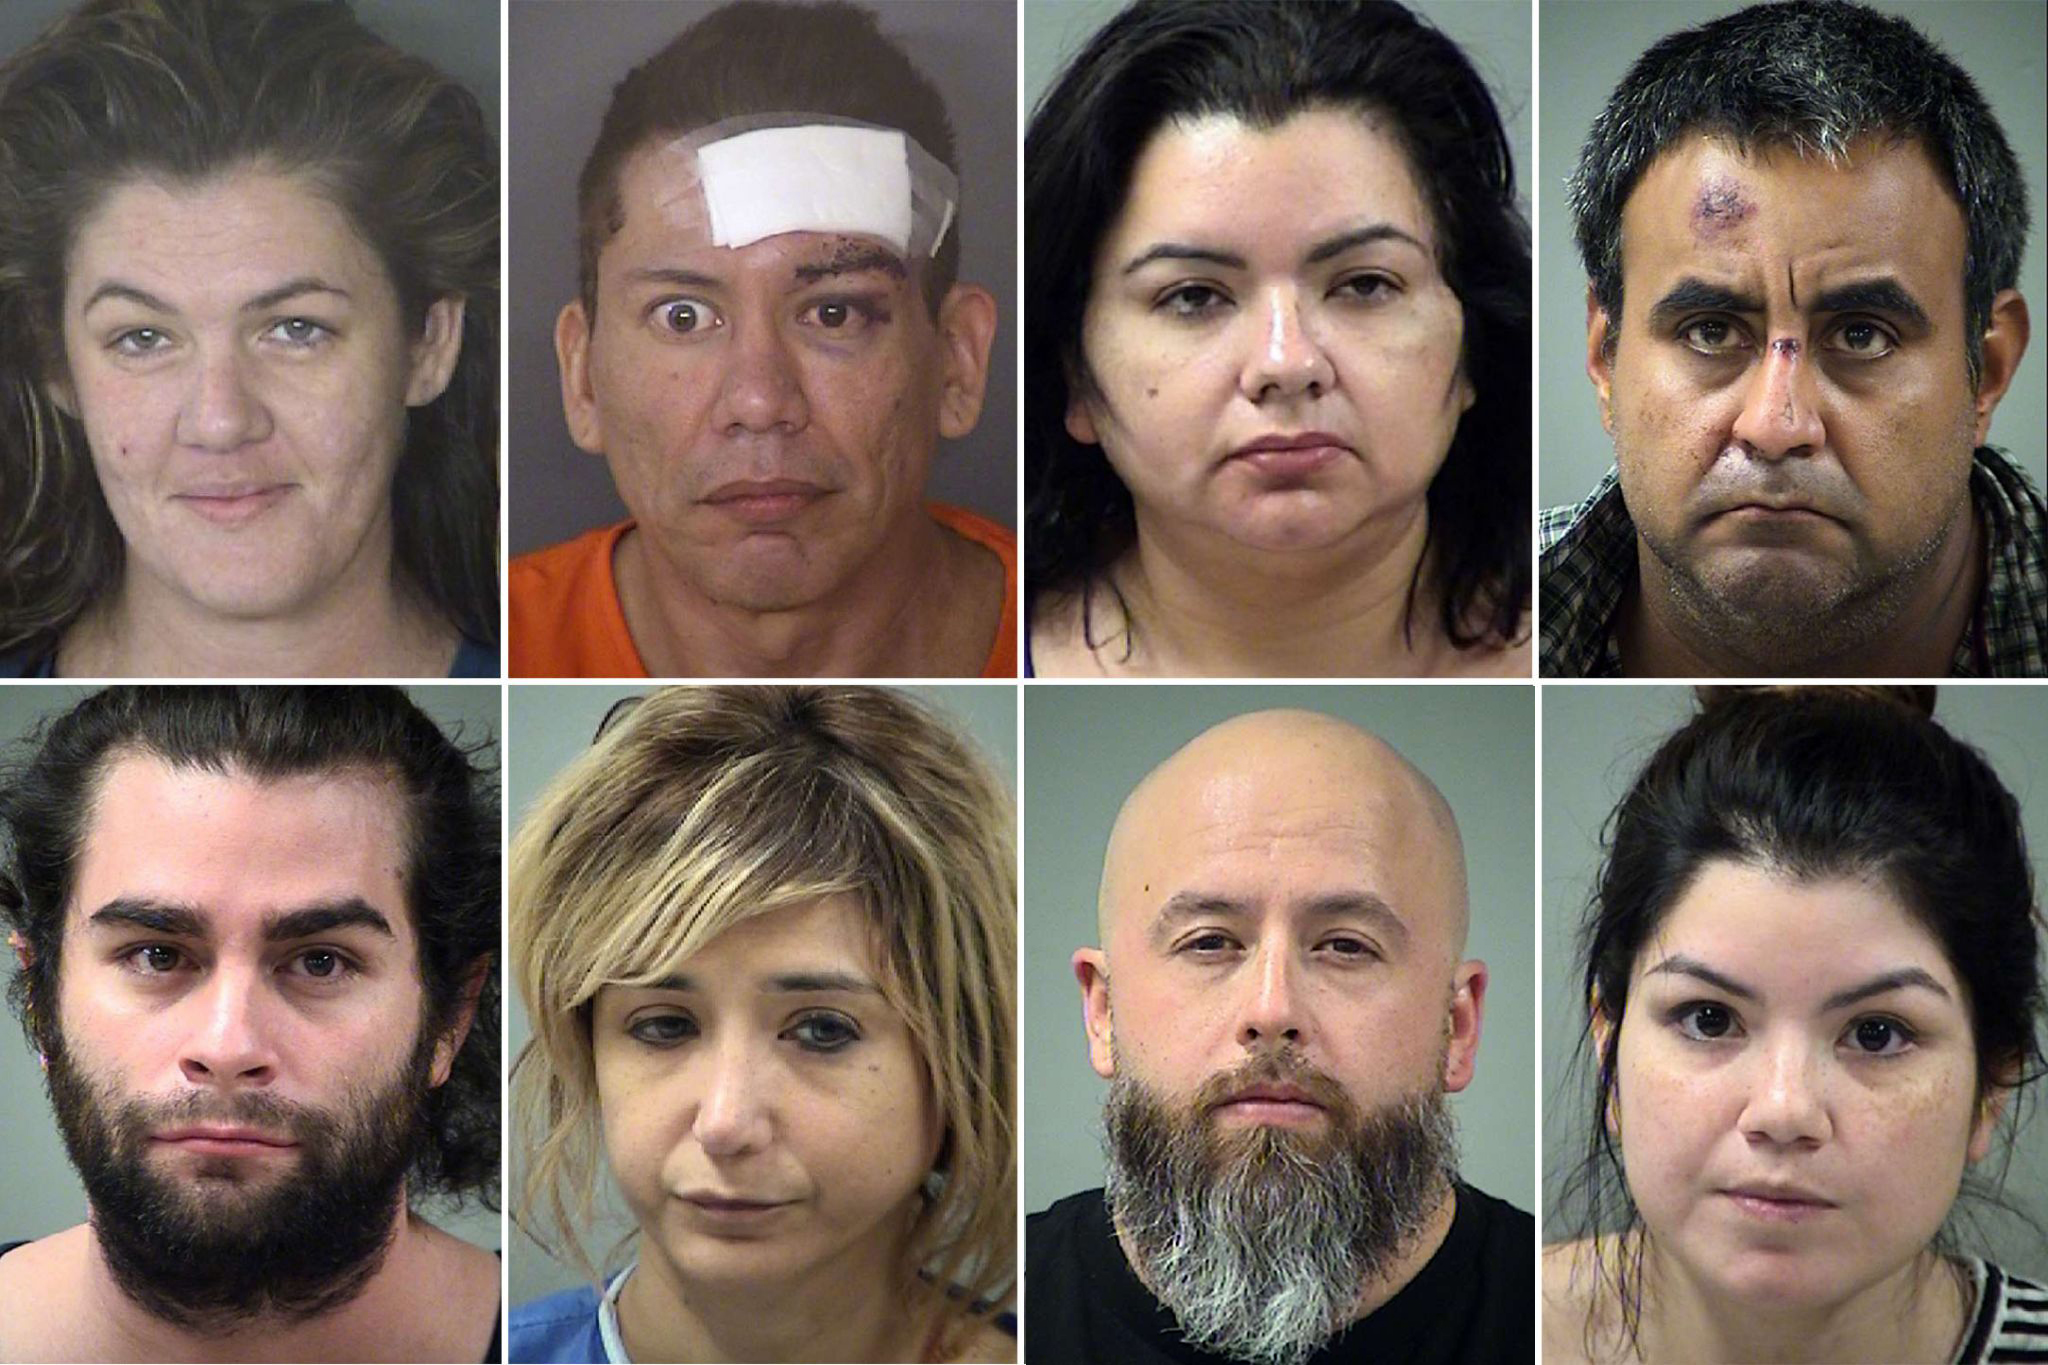 Records 52 People Arrested On Felony Drunk Driving Charges In Bexar County In February 2018